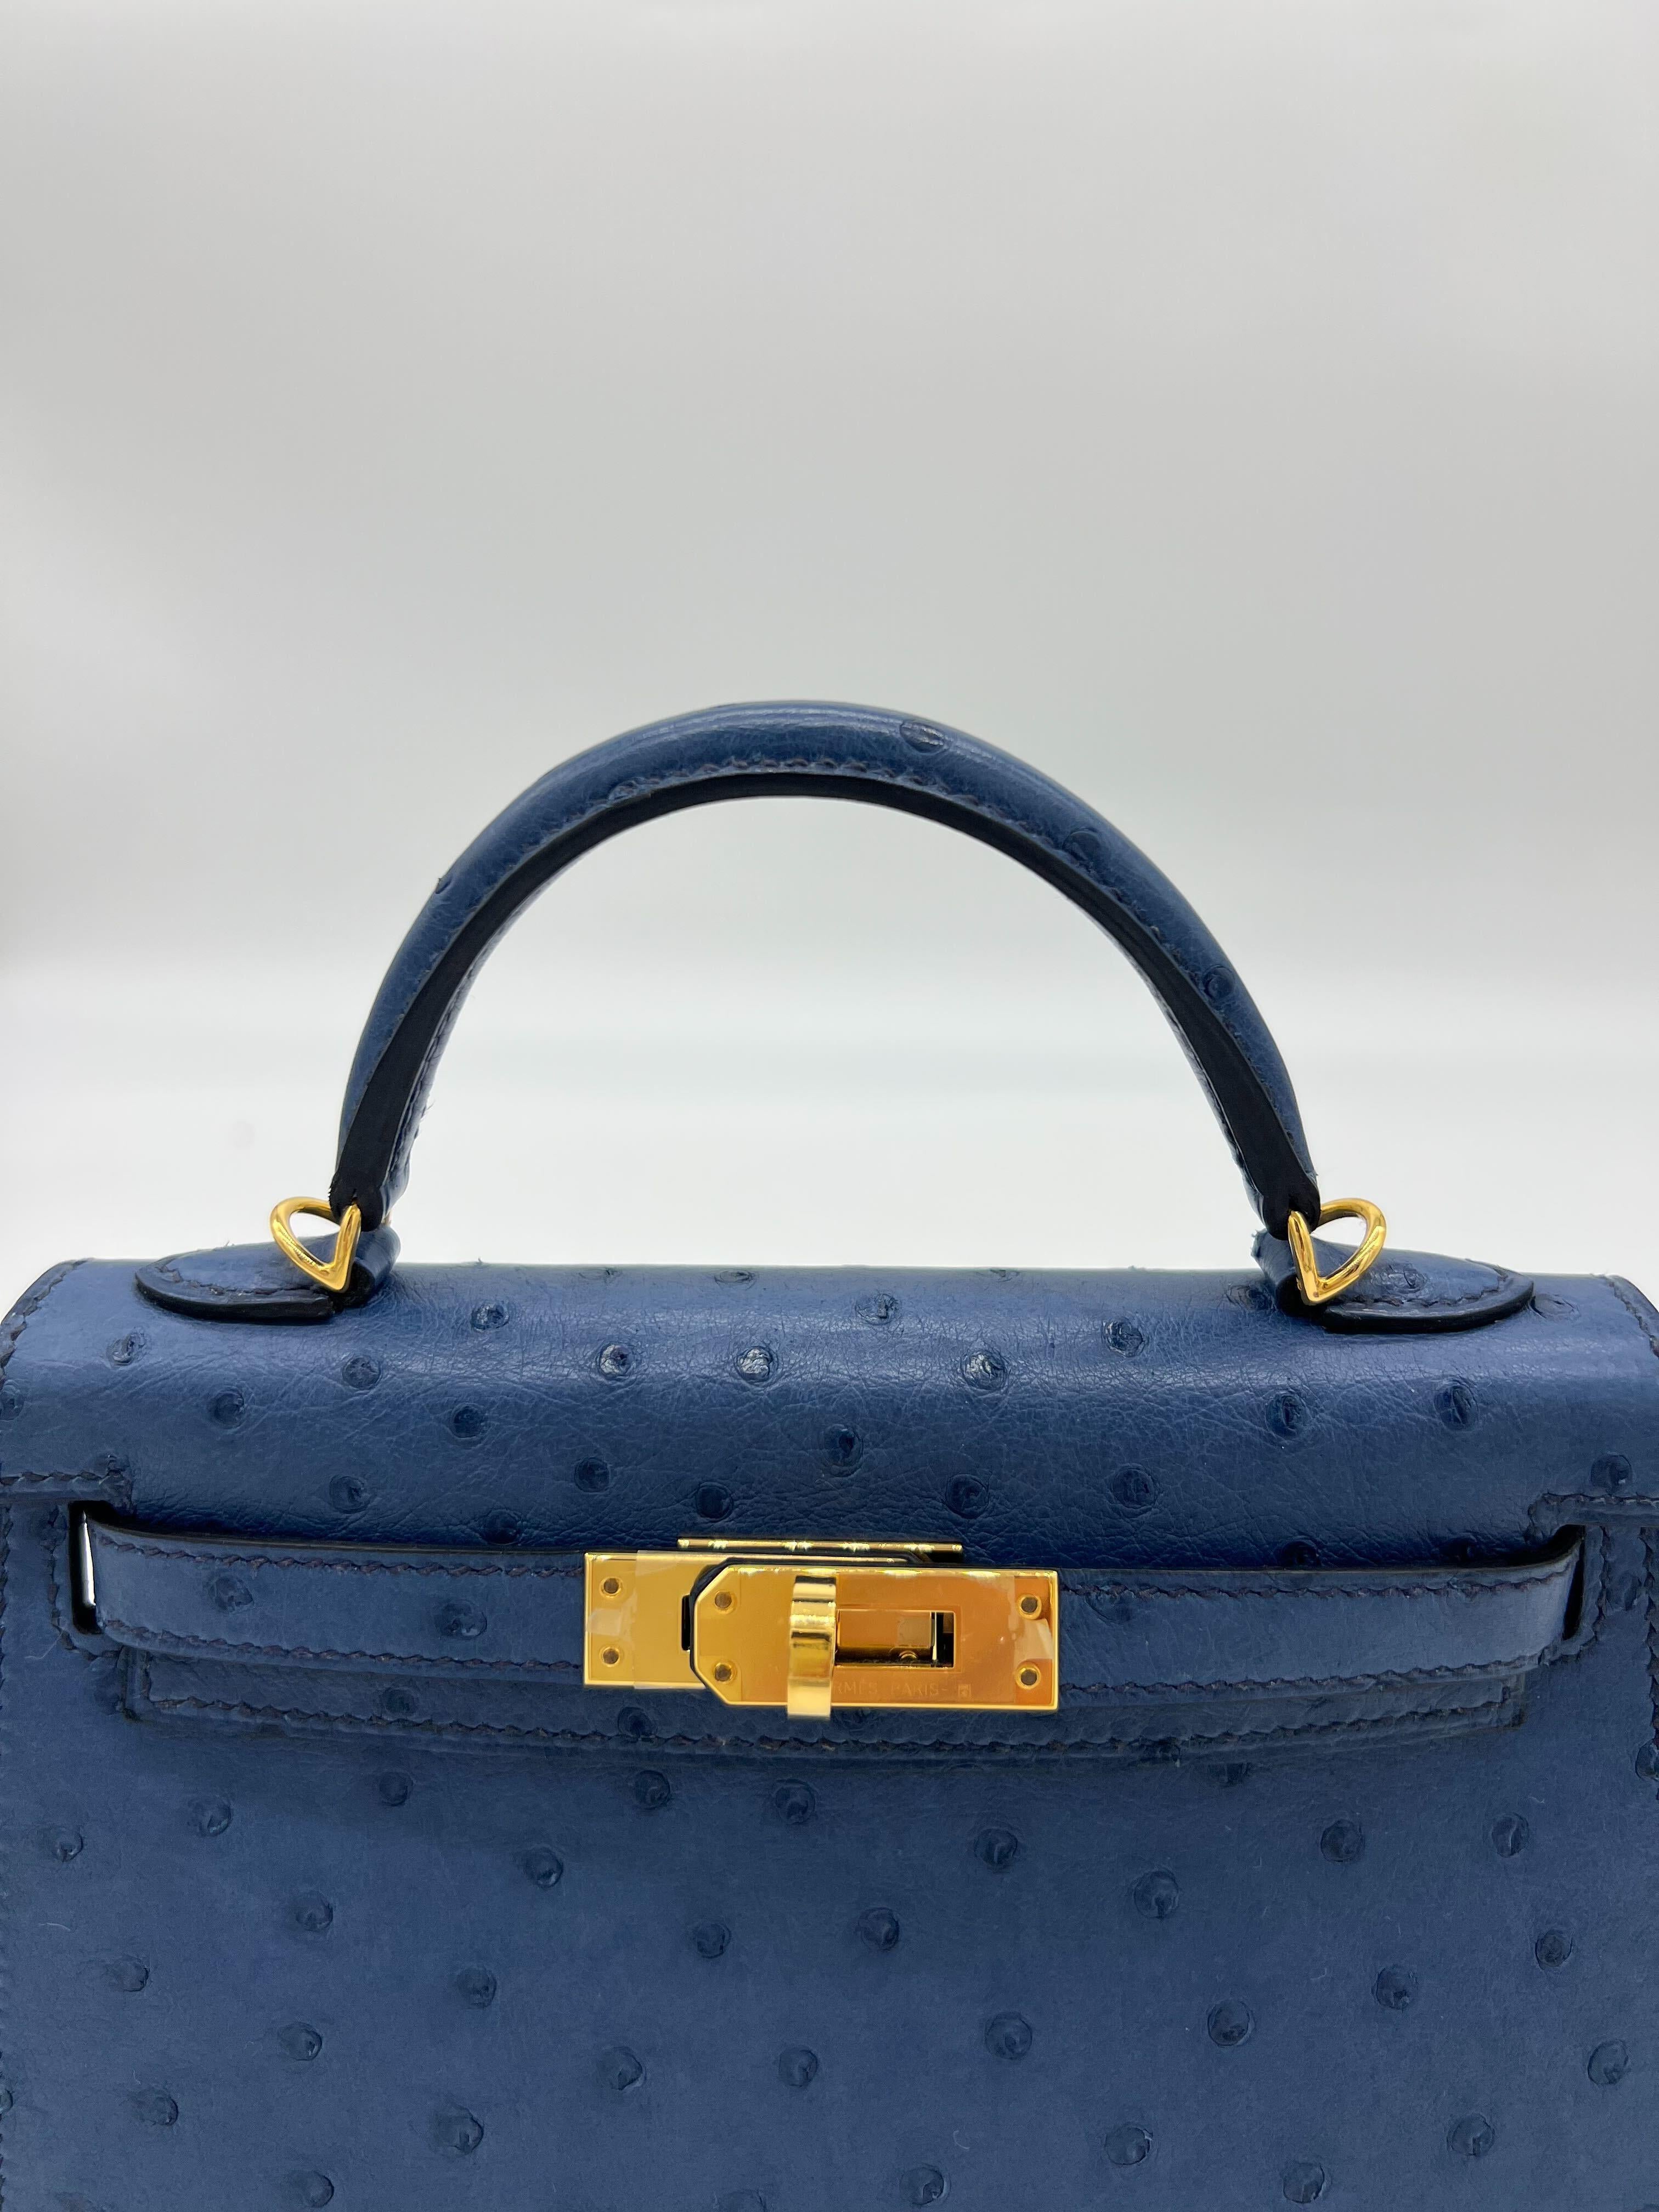 Hermes Kelly 20 Mini Bleu Roy Ostrich Leather Gold Hardware

Condition & Year: New 2021
Material: Ostrich Leather
Measurements: 20cm x 16cm x 10cm
Hardware: Gold

*Comes with full original packaging.
*Full plastic on hardware.